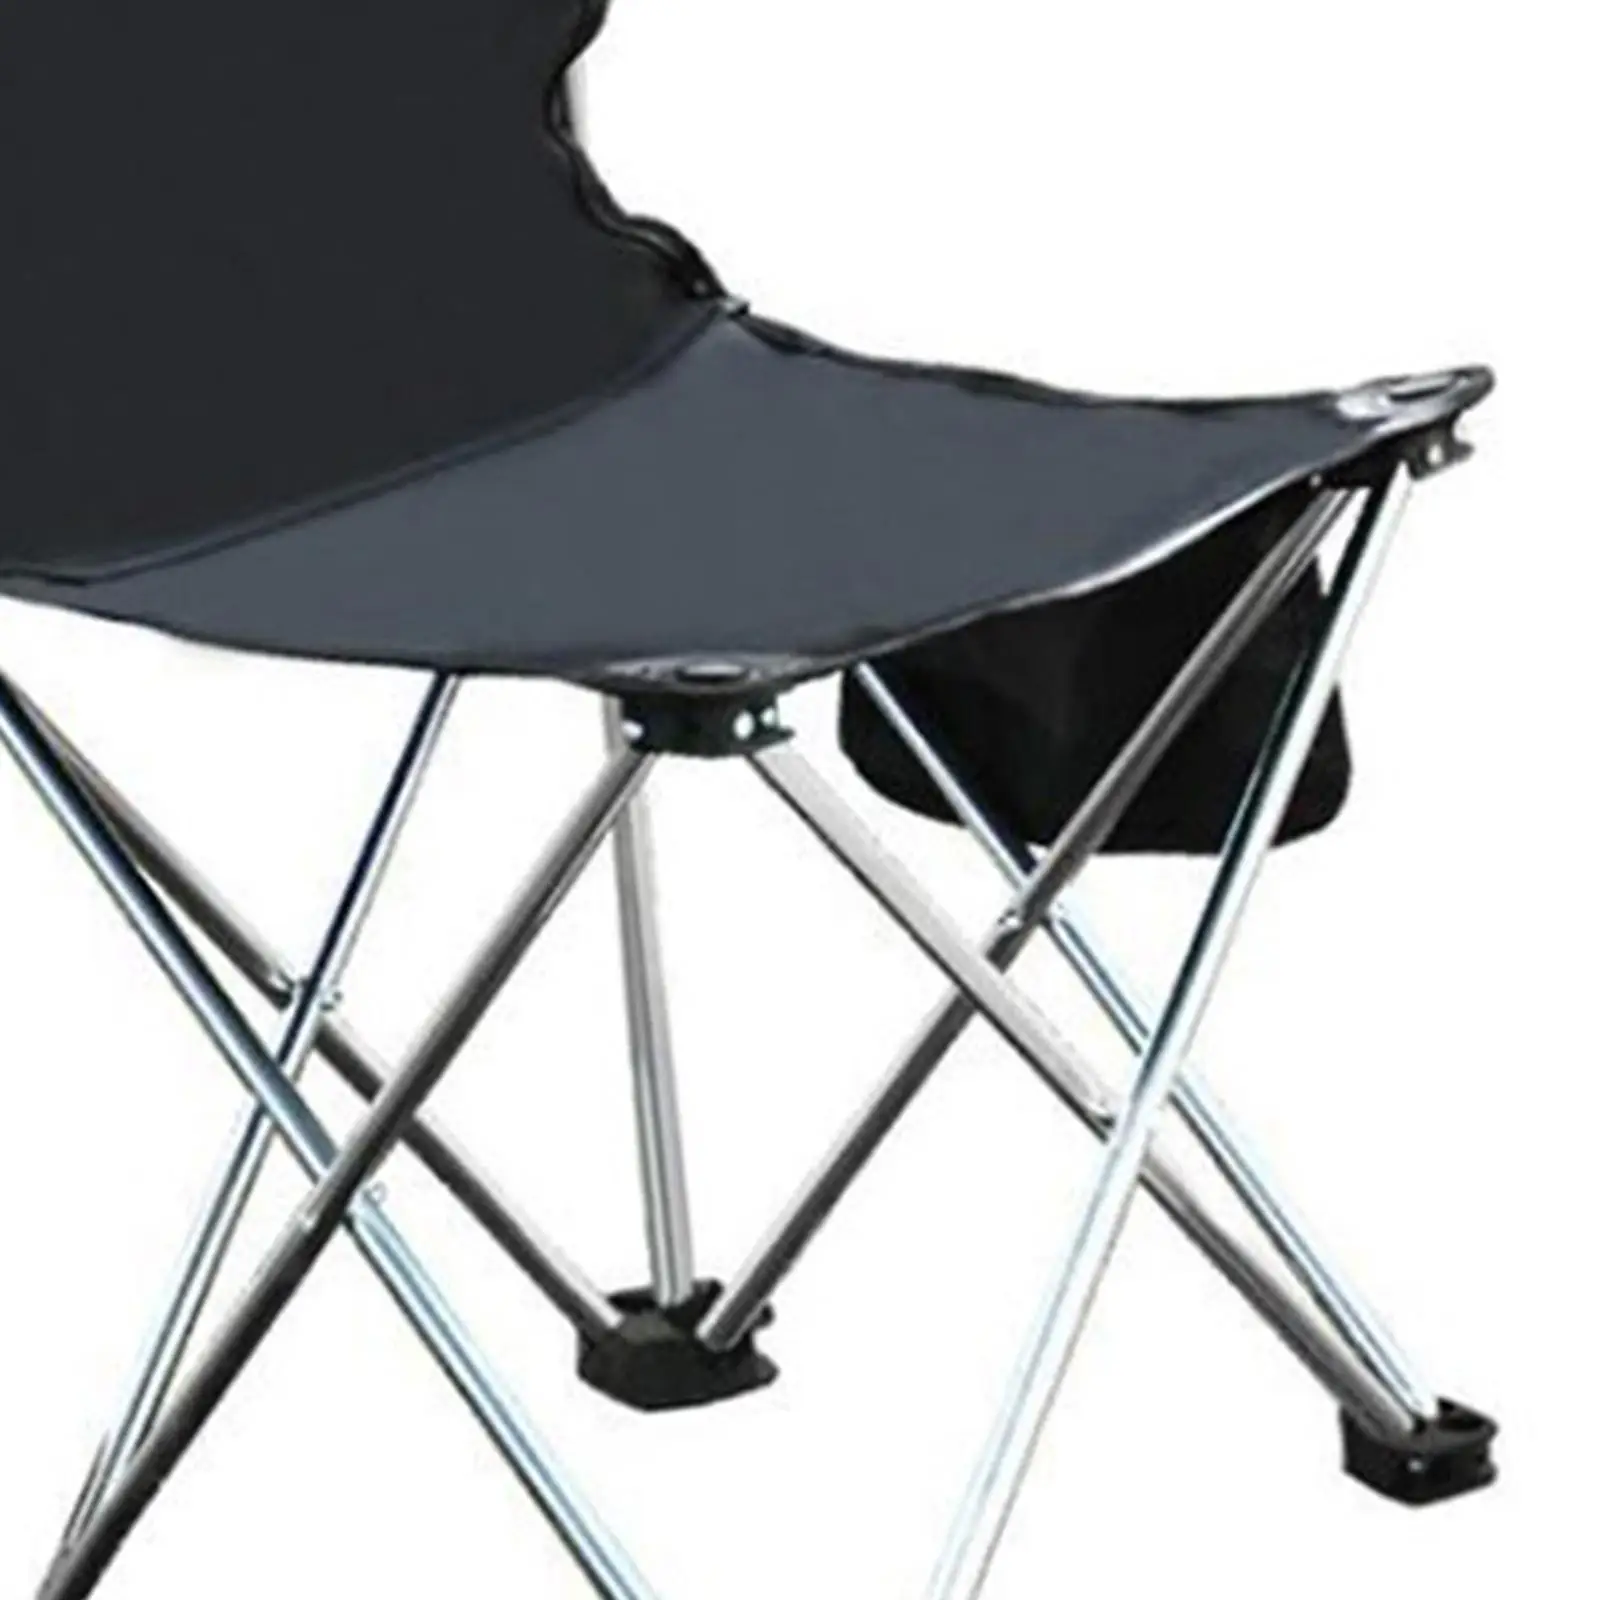 Portable Camping Chair with Side Pocket and Carrying Bag Included, Collapsible Chair for Camping, Beach, and Sports